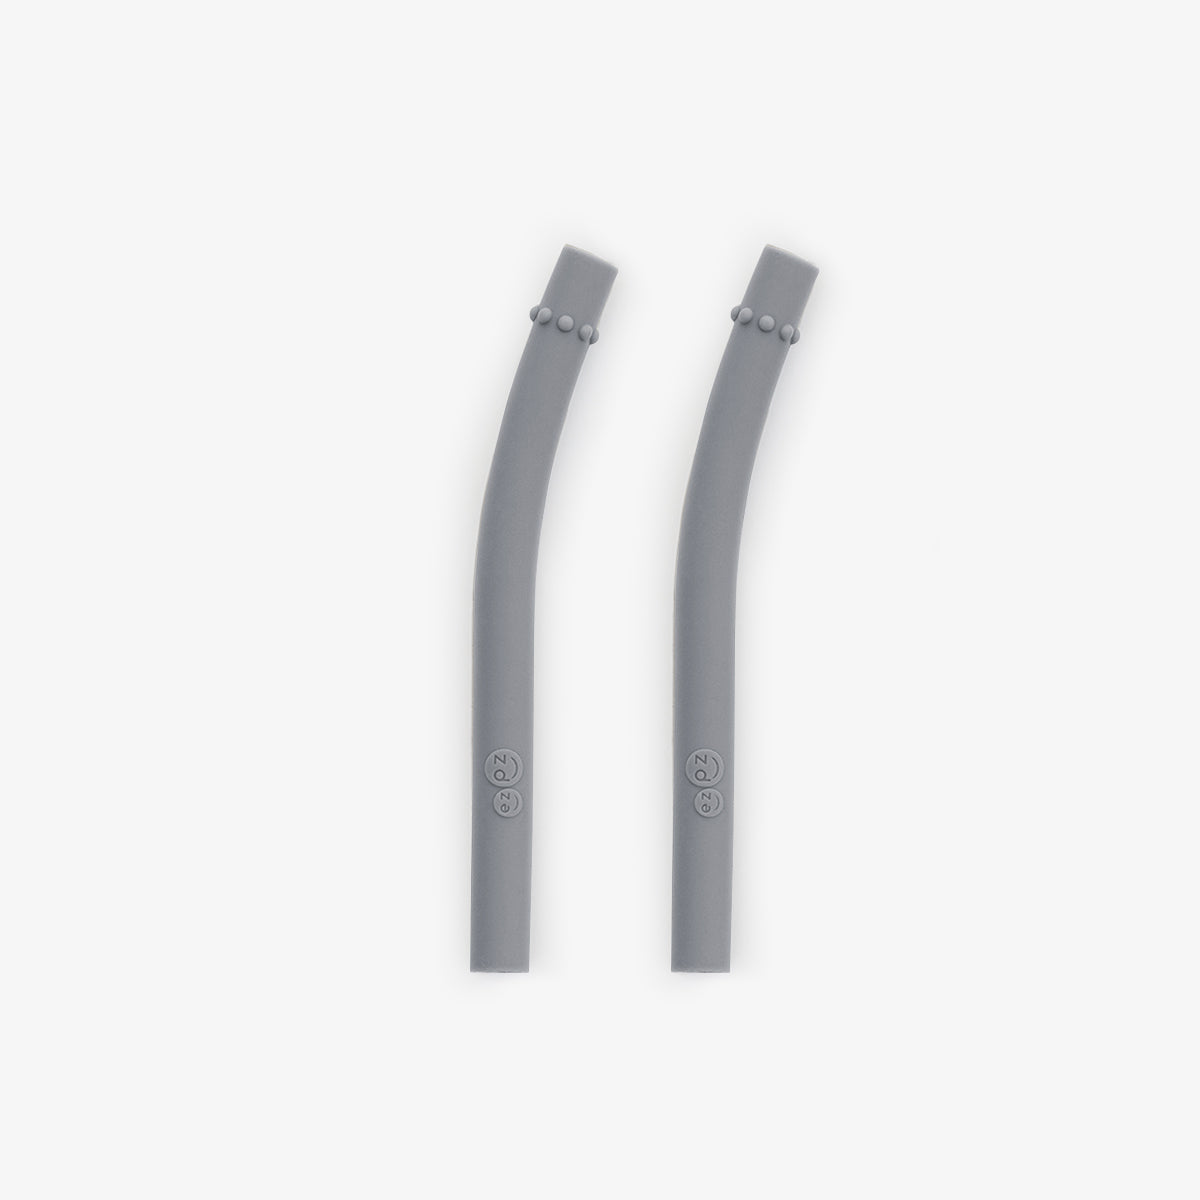 Mini Straws in Gray / Silicone Straw Replacement Pack for the ezpz Mini Cup & Straw System